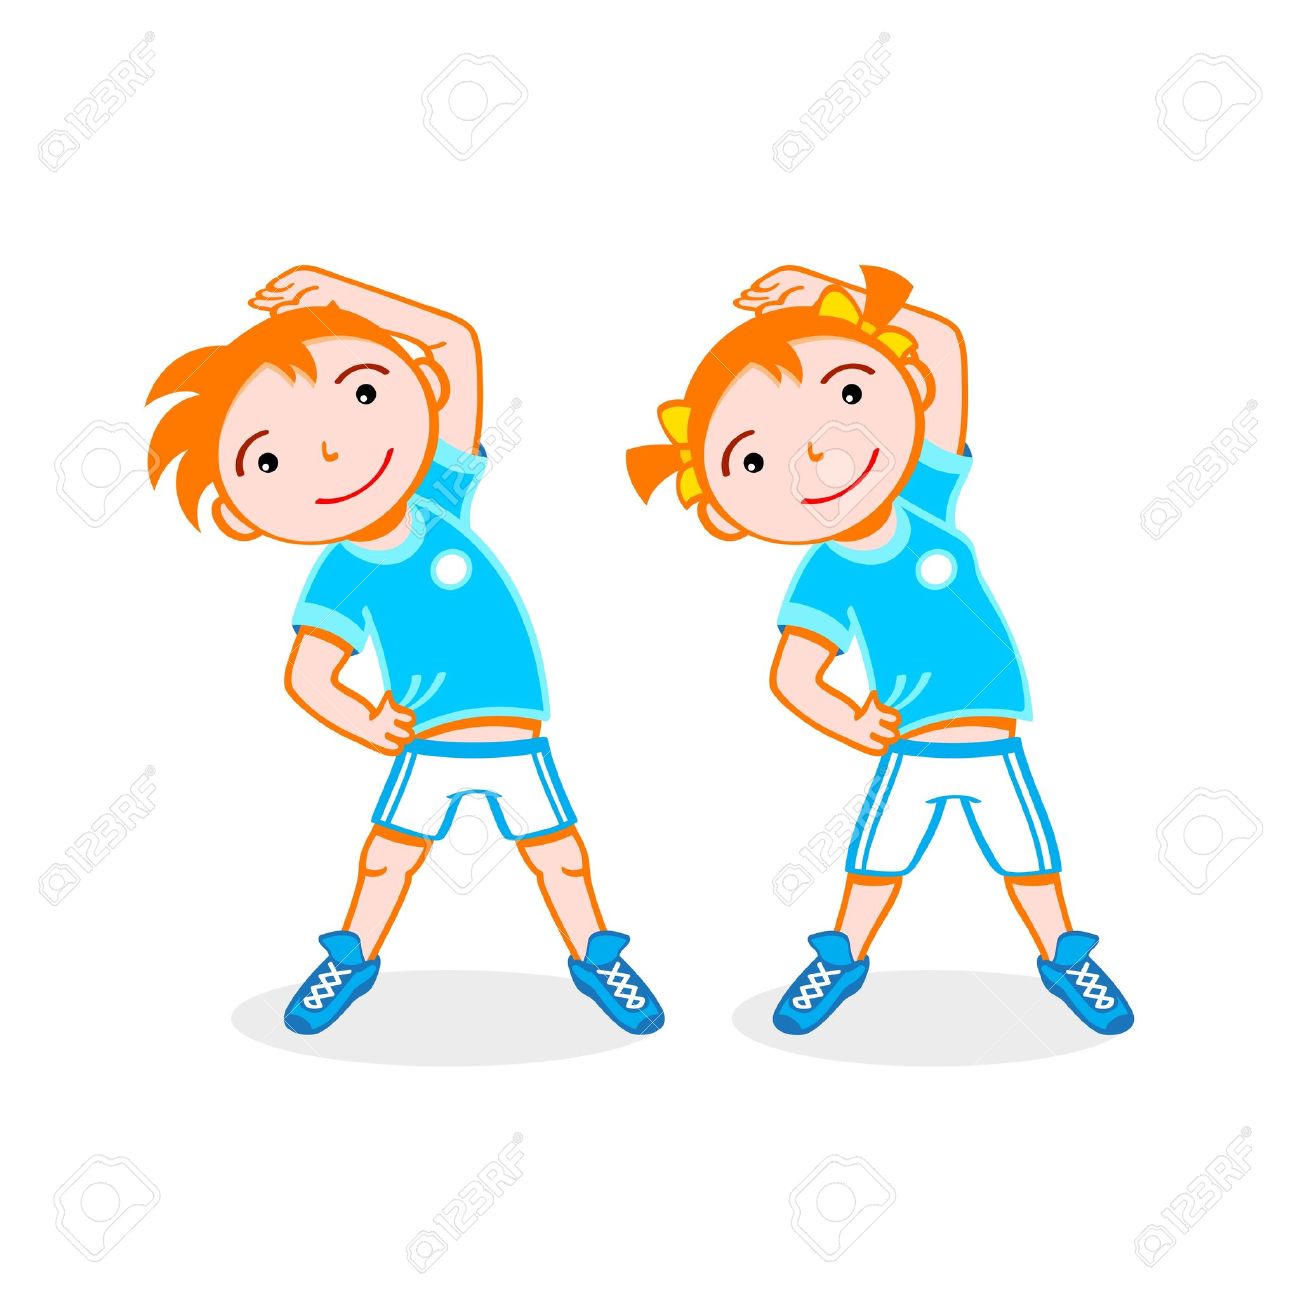 exercise cartoon images